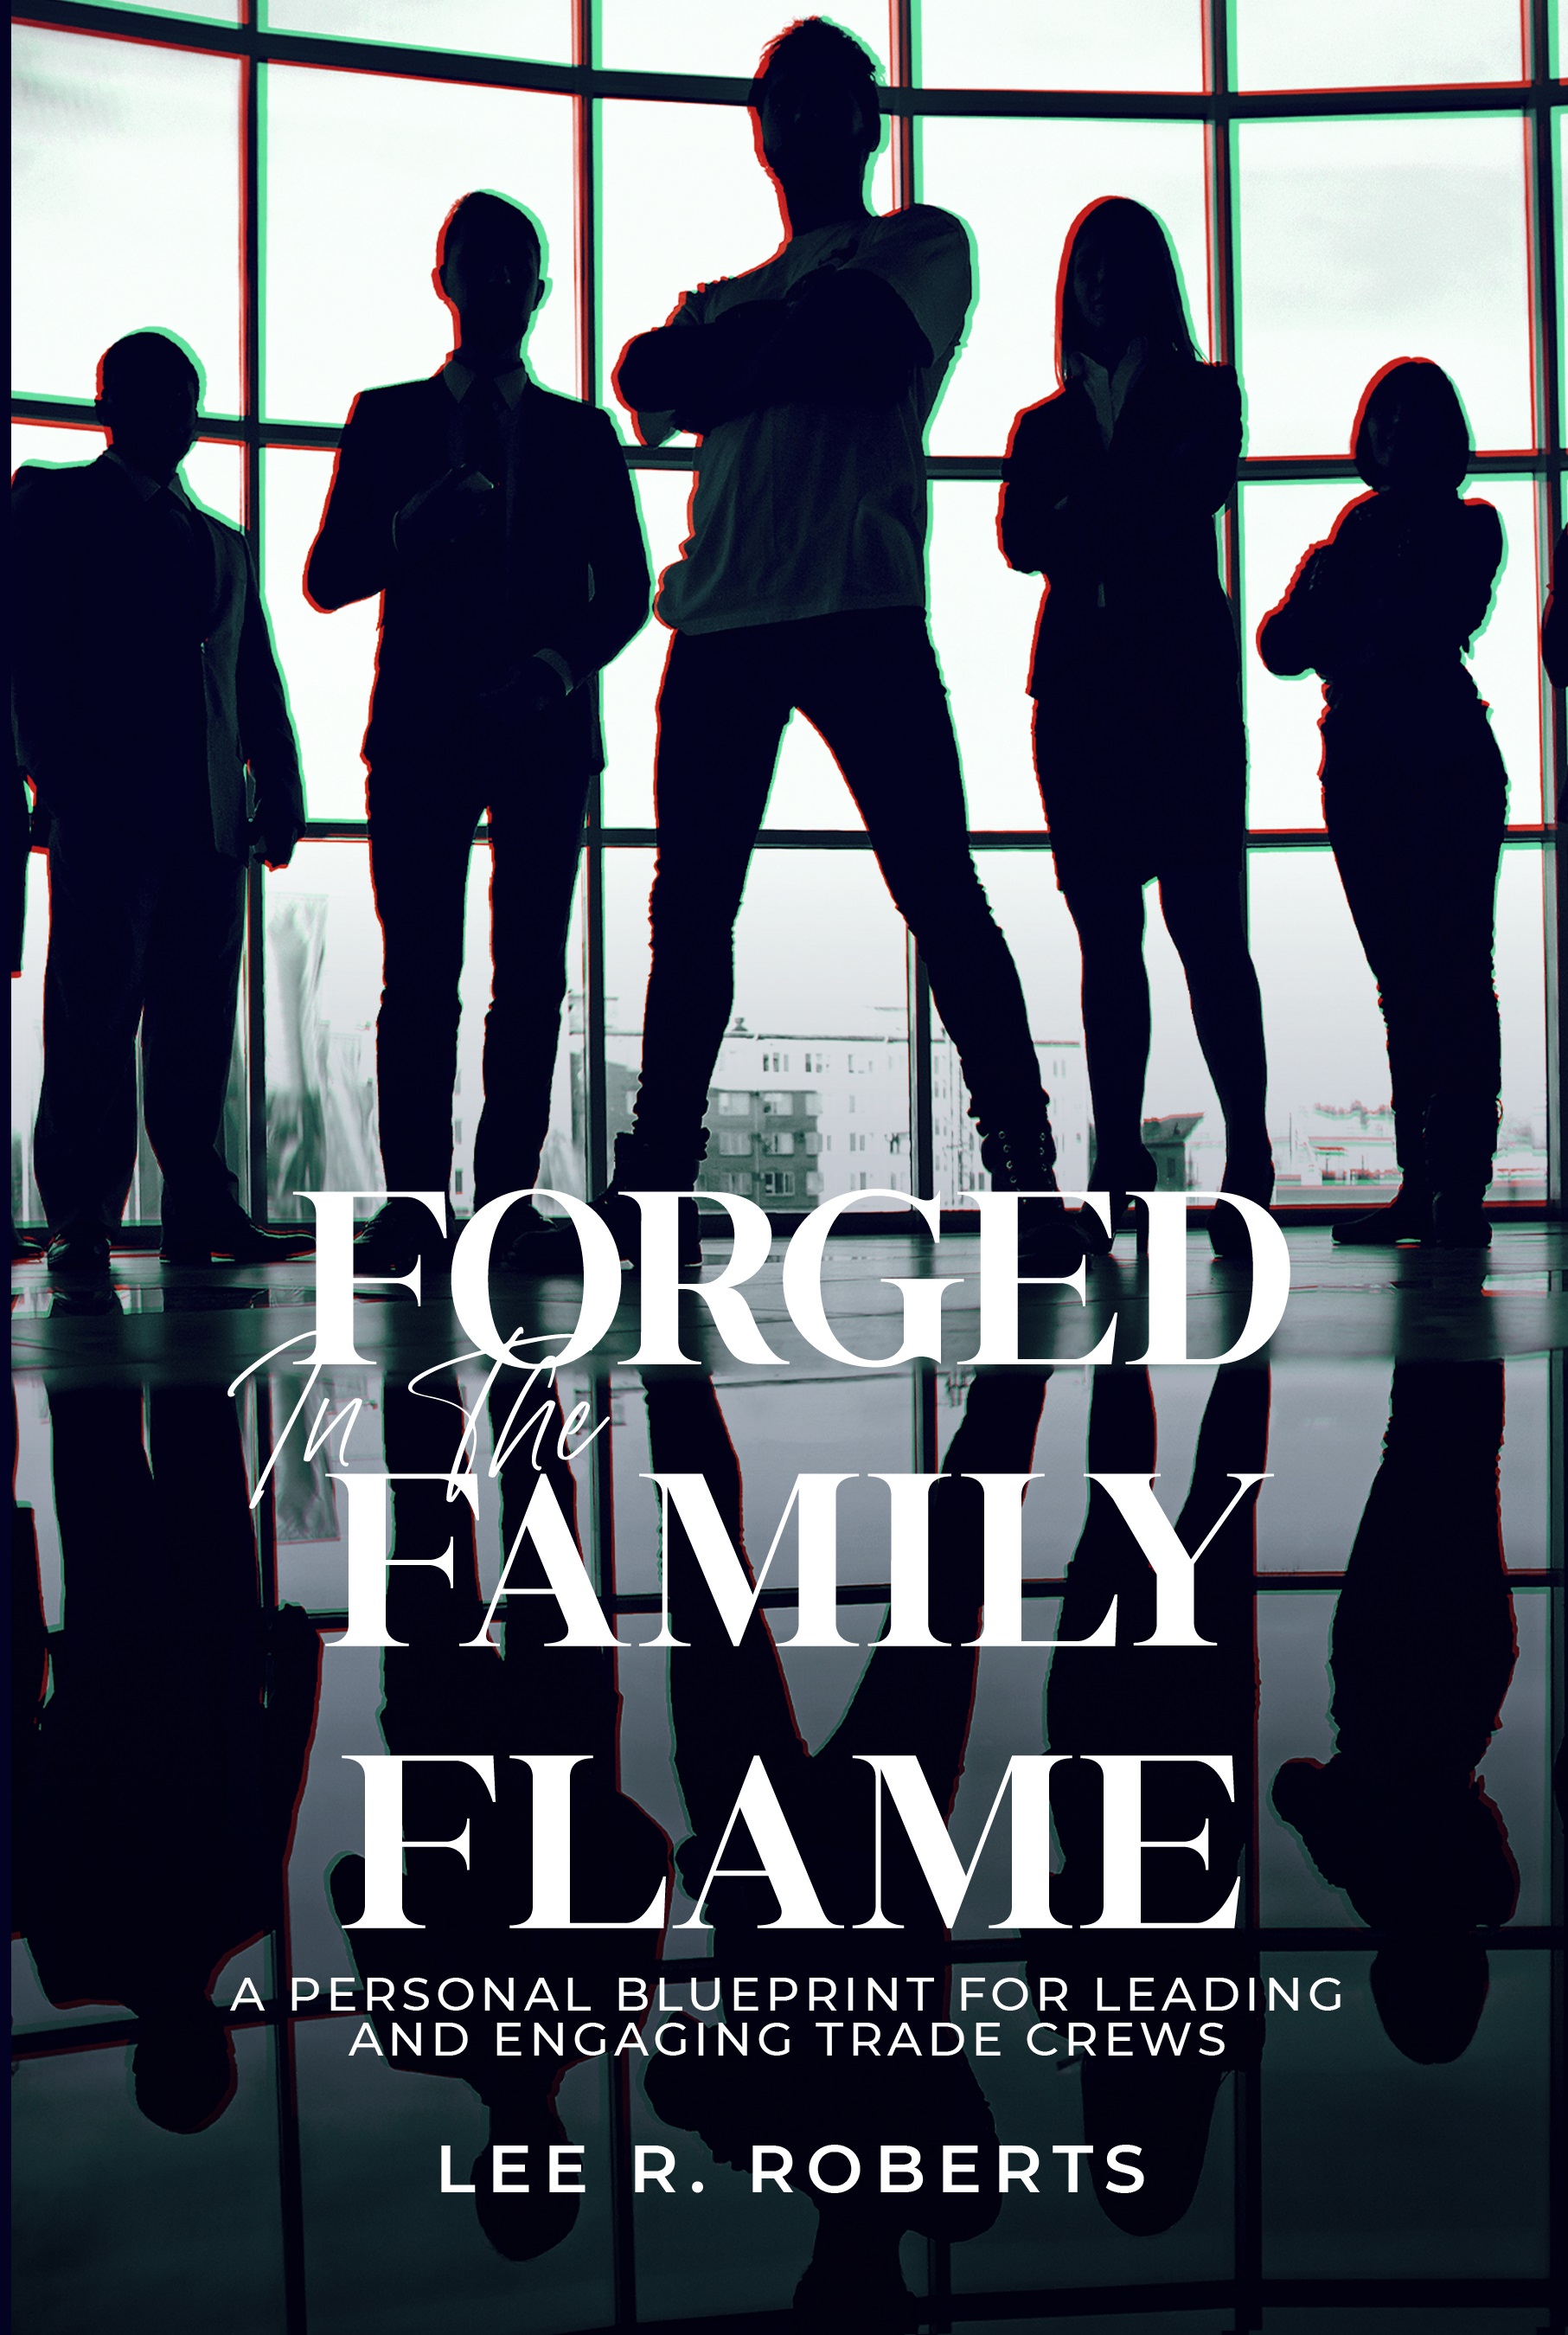 Dr. Lee Roberts Unveils the Nine Game-Changing Traits of Exceptional Leaders in Forged in the Family Flame